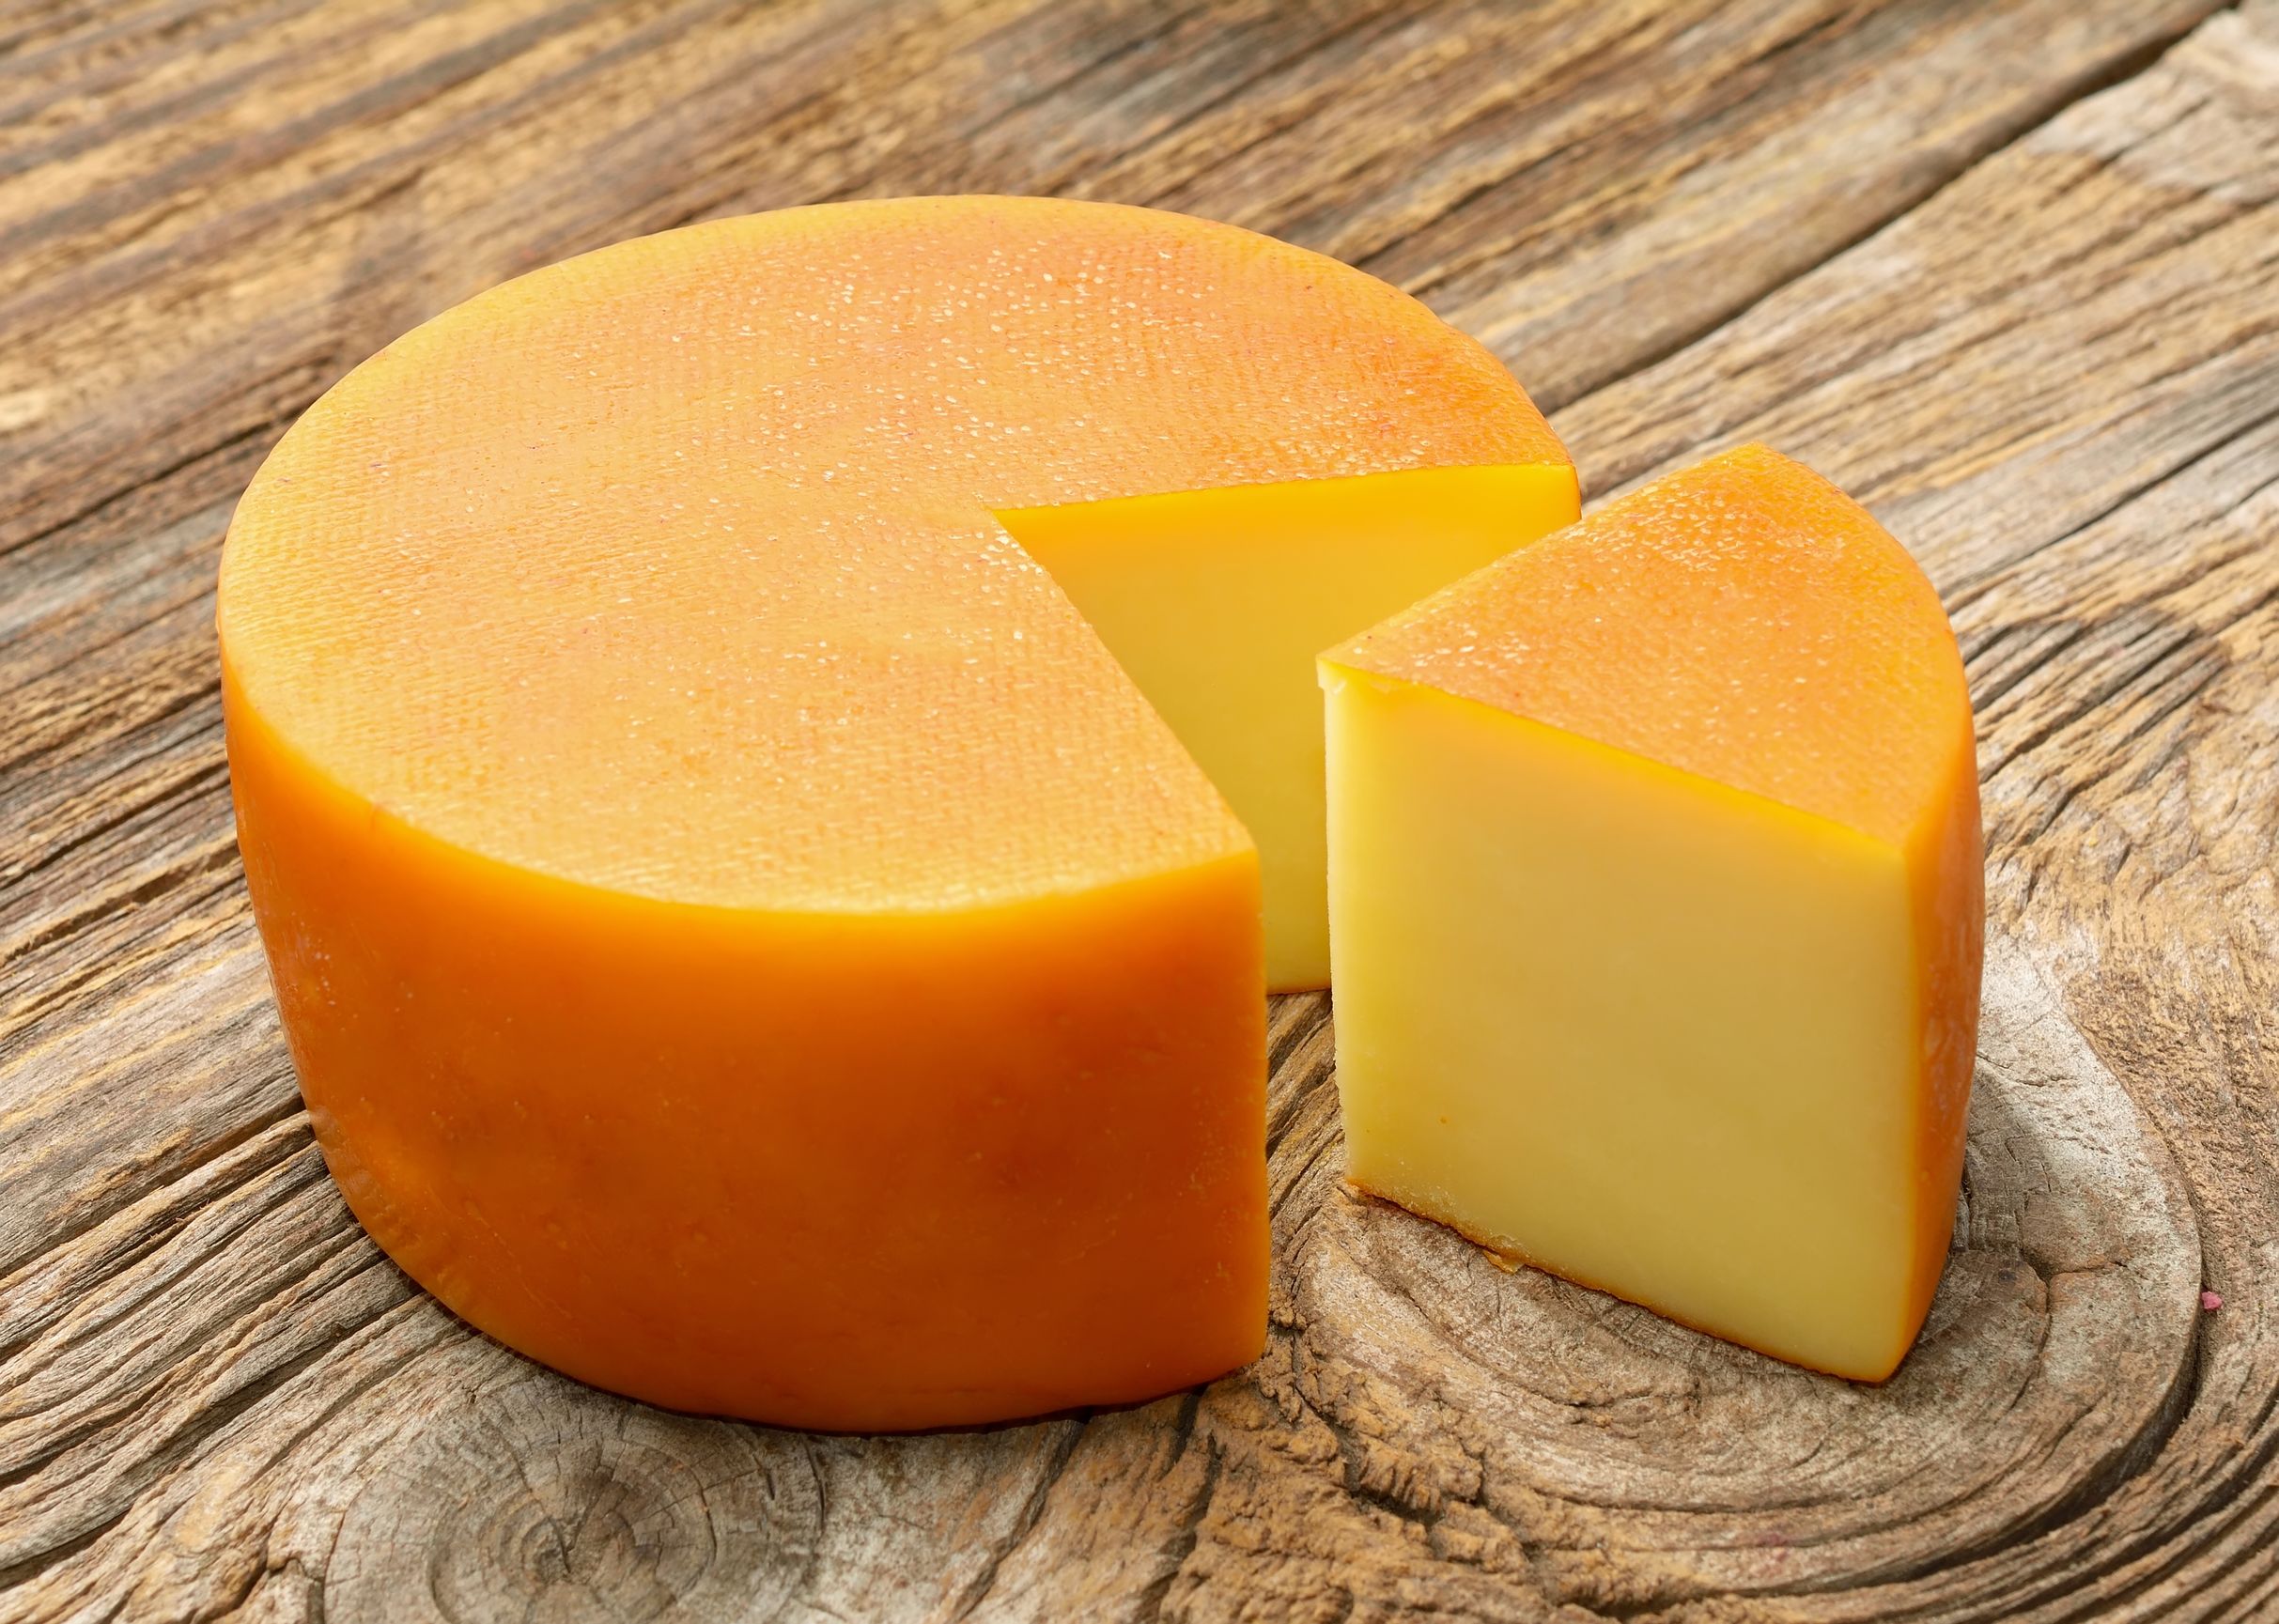 How to Make Gouda Cheese | The CheeseMaker